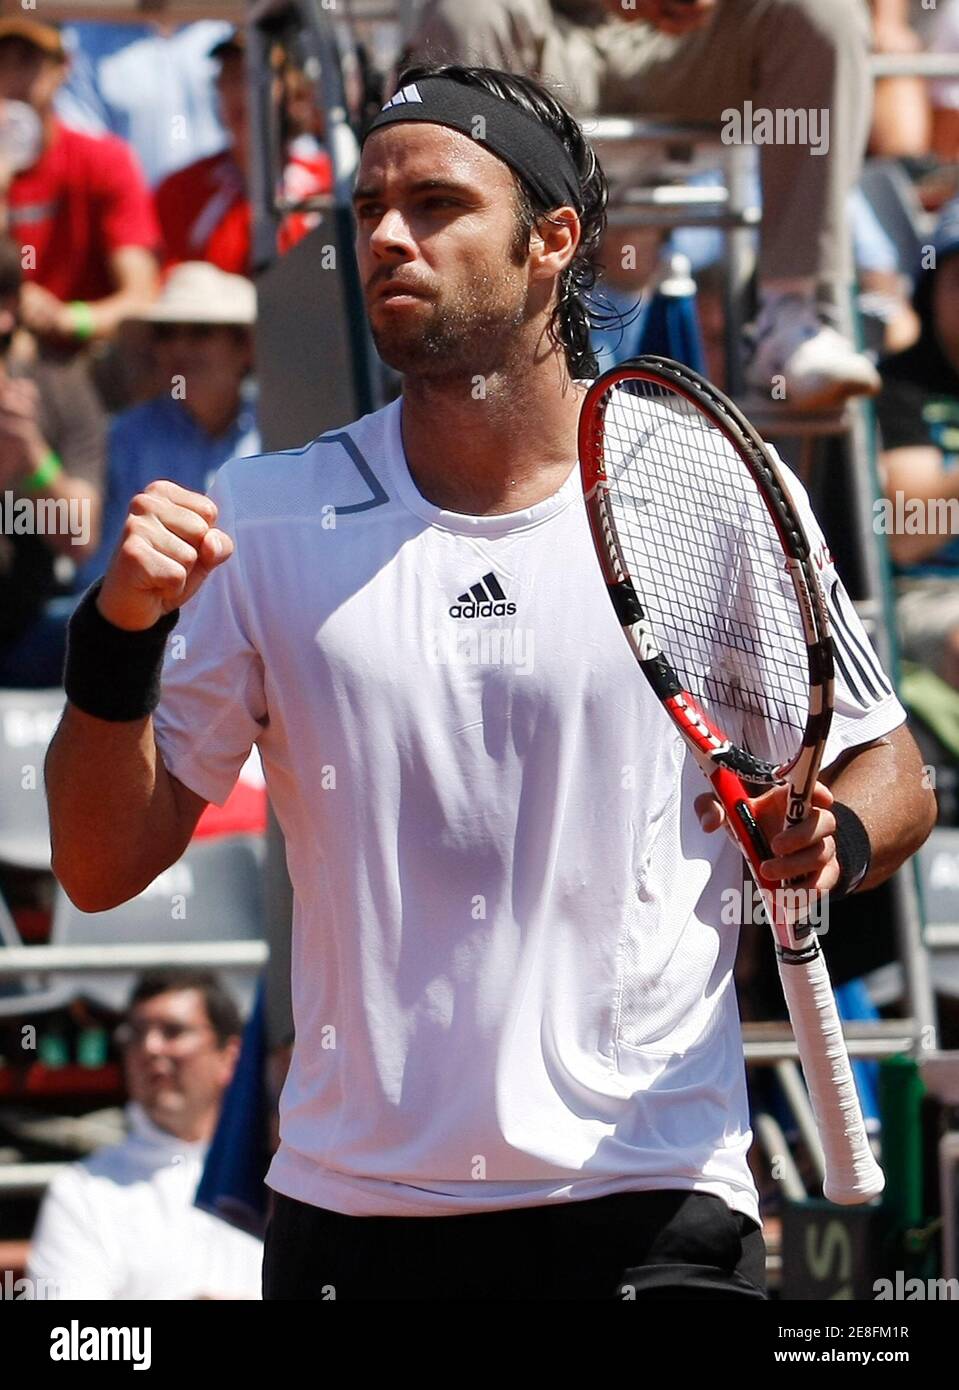 Chile's Fernando Gonzalez reacts after defeating against Israel's Dudi Sela  during their Davis Cup tennis match in La Serena, March 8, 2010.  REUTERS/Eliseo Fernandez (CHILE - Tags: SPORT TENNIS Stock Photo - Alamy